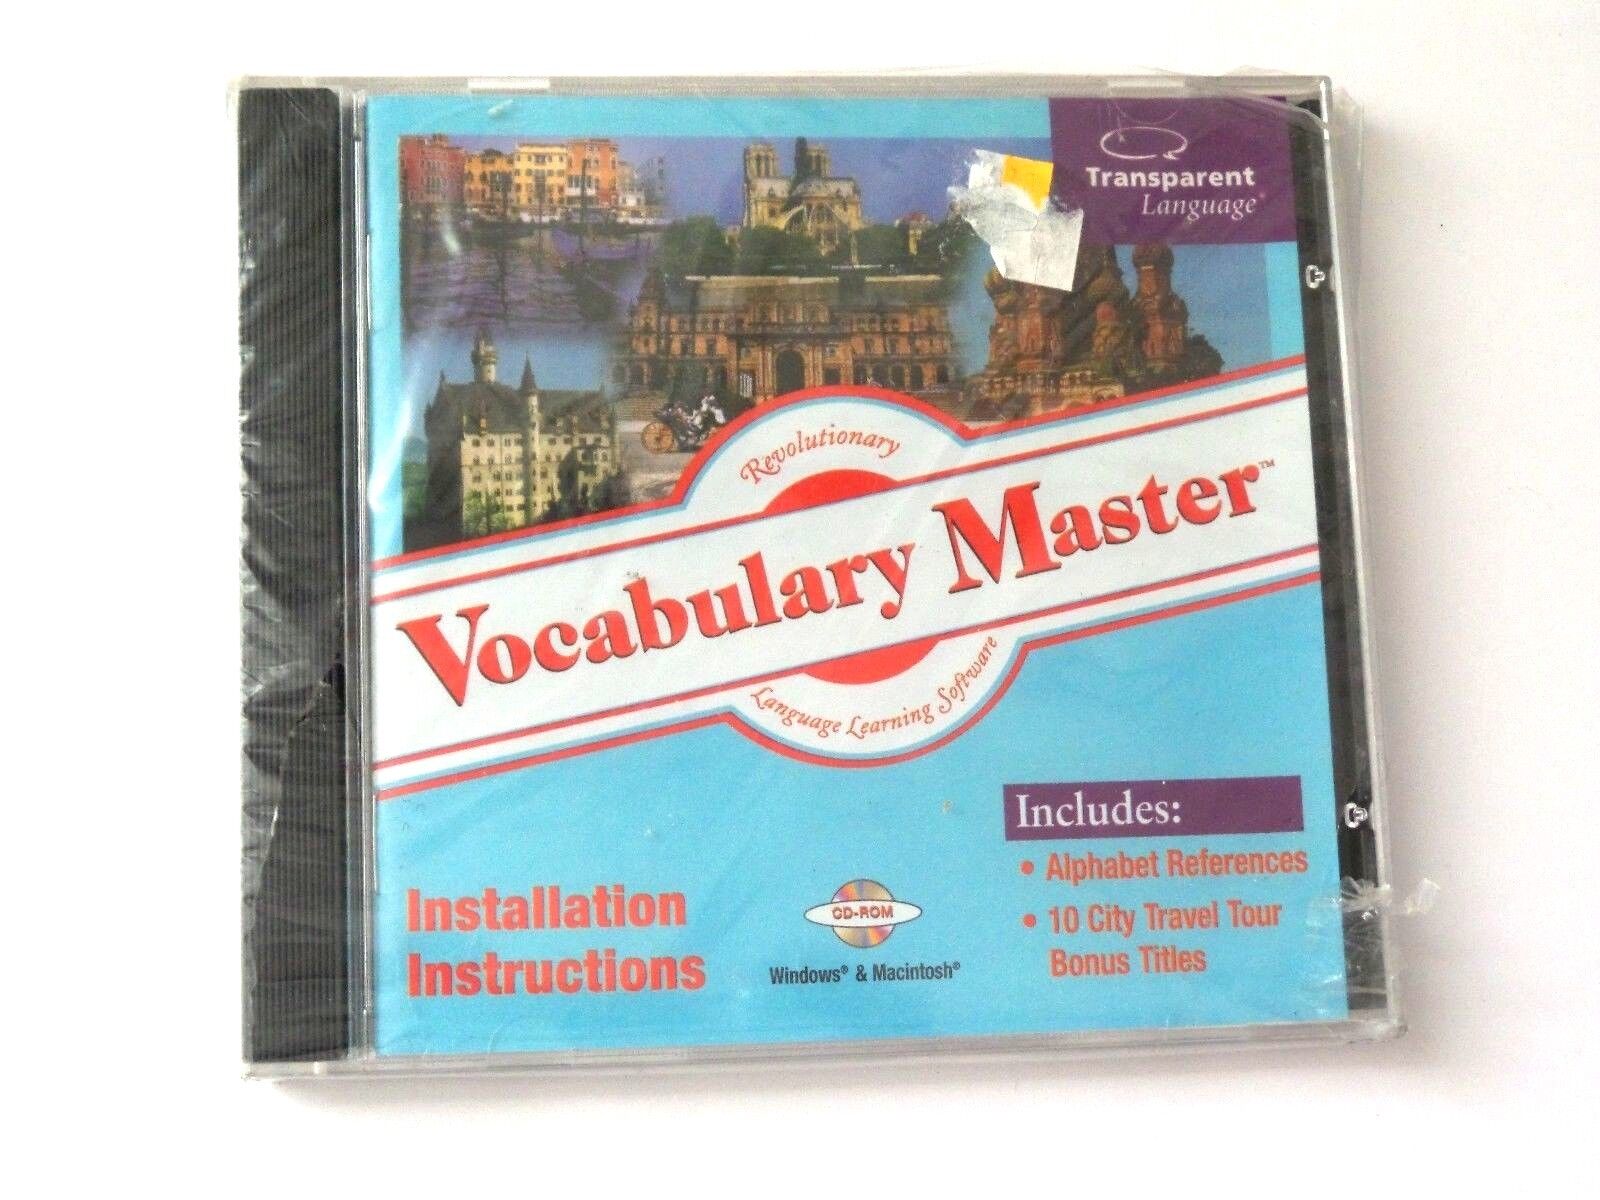 Vocabulary Master: Transparent Language (CD, Win/Mac) - Ships within 12 hours